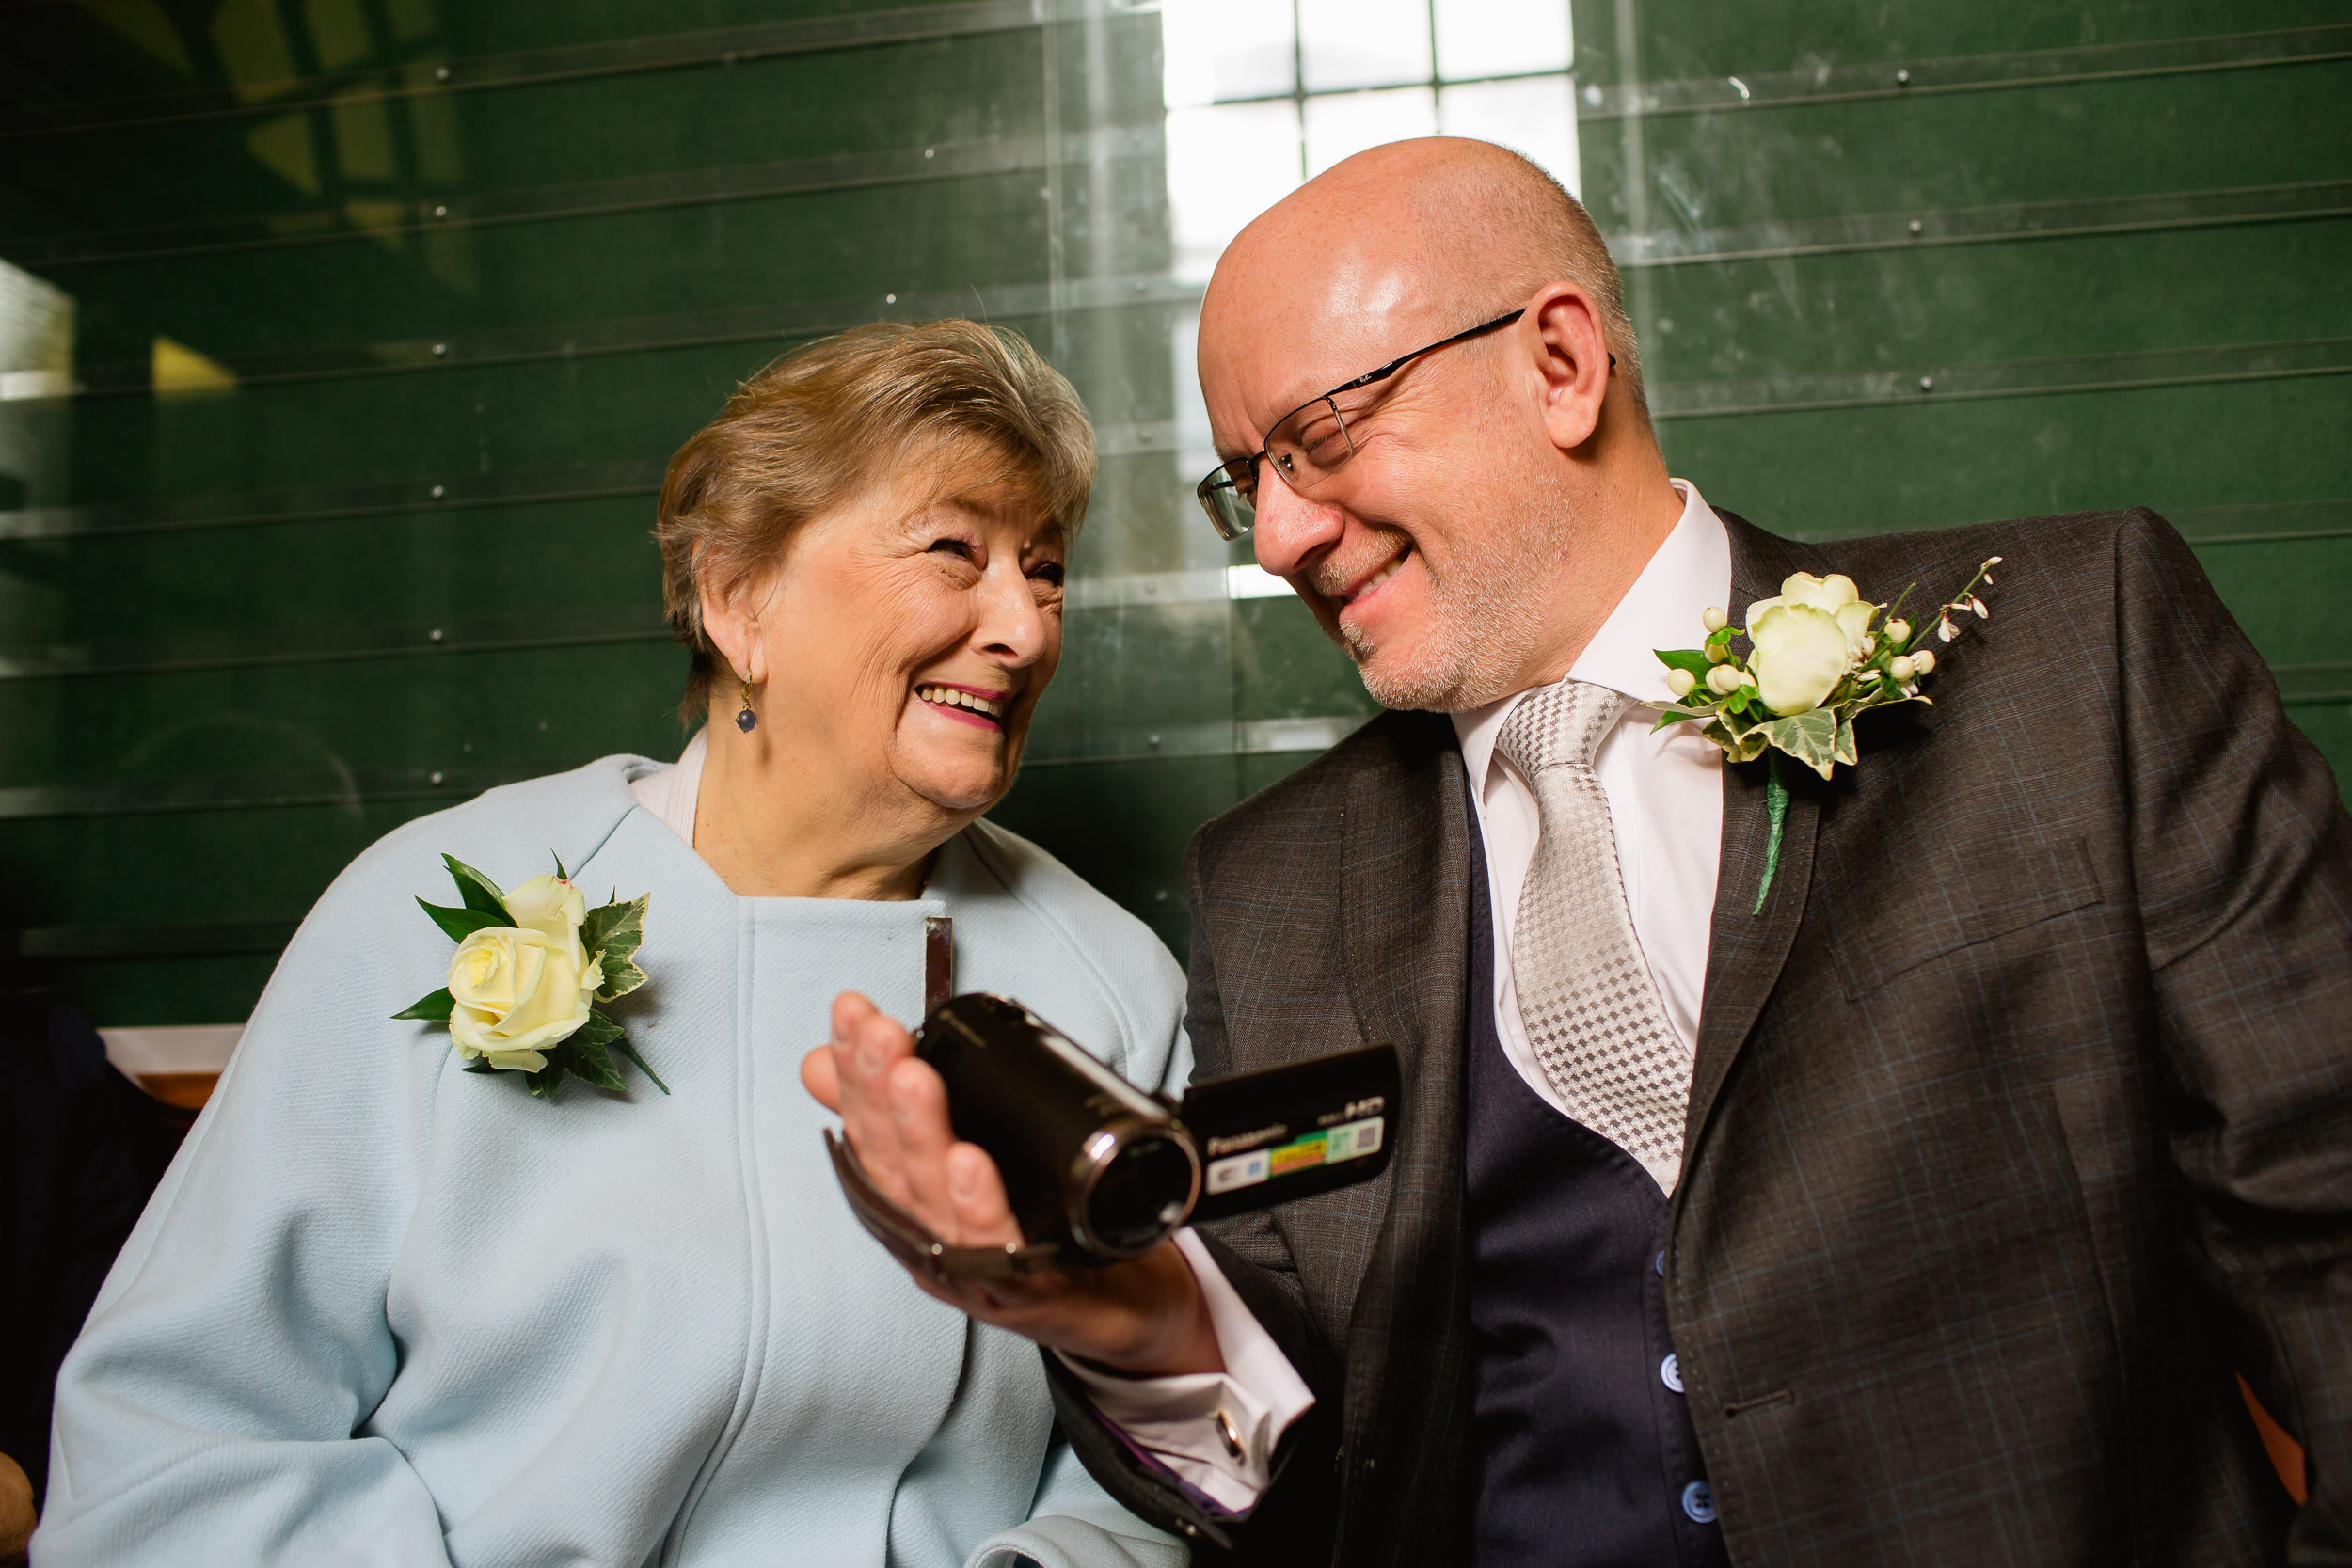 Wedding at Chelsea registry office - mother and son wedding day - Chelsea wedding photography